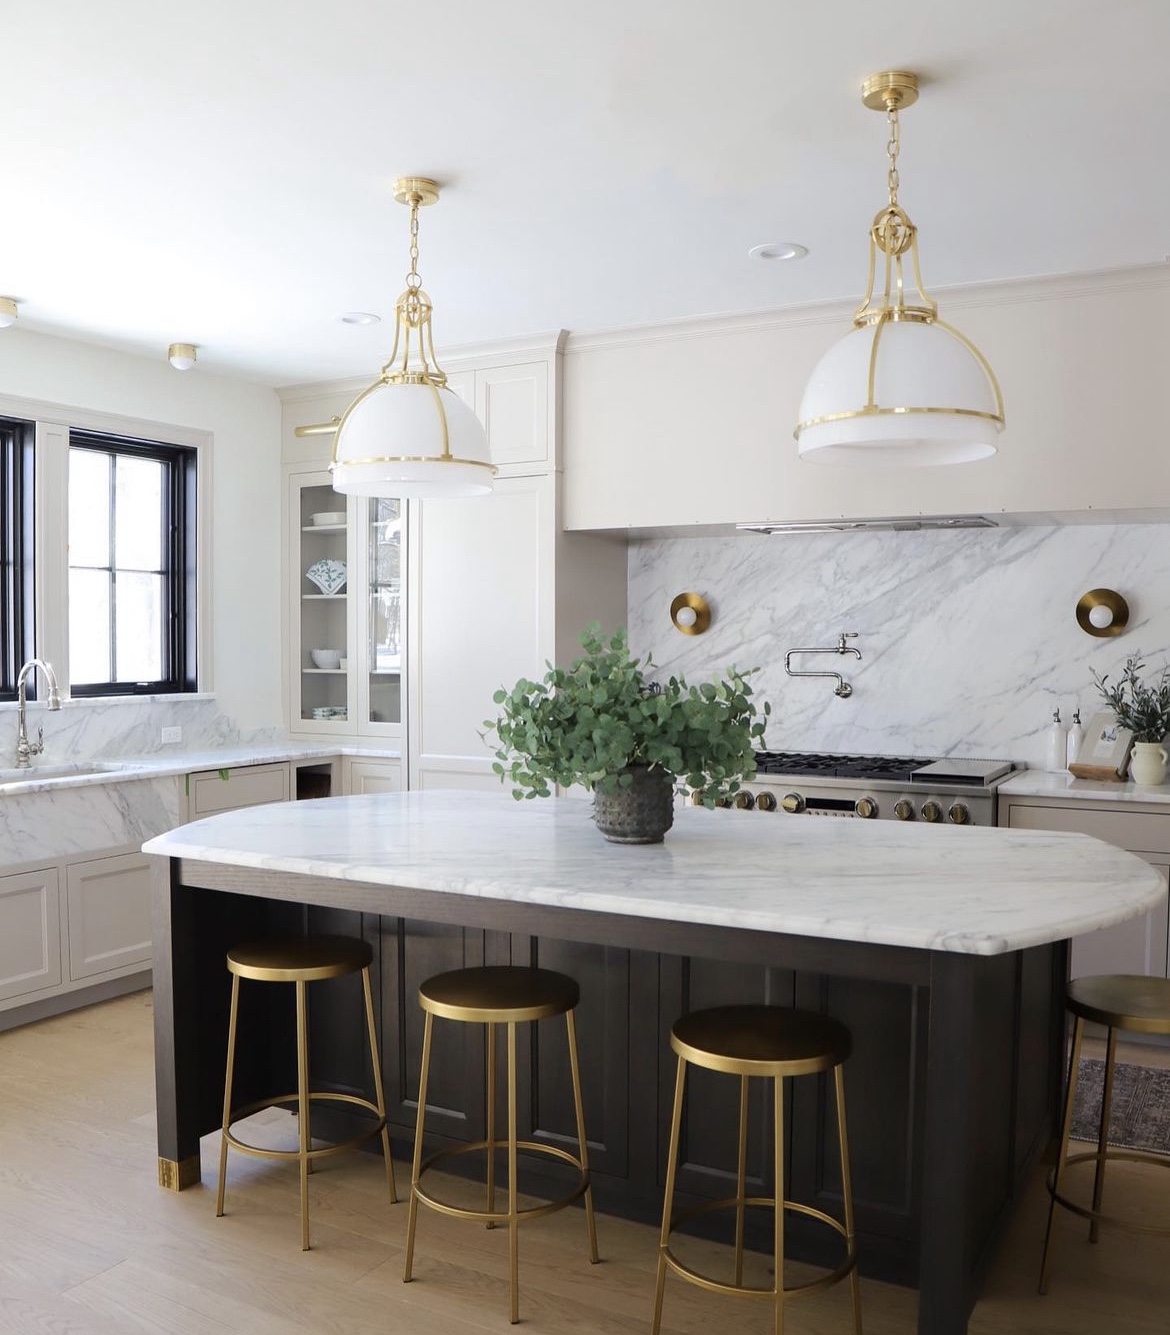 Taupe and Beige Kitchen Cabinet Colors You’ll fall in Love With - Hana ...